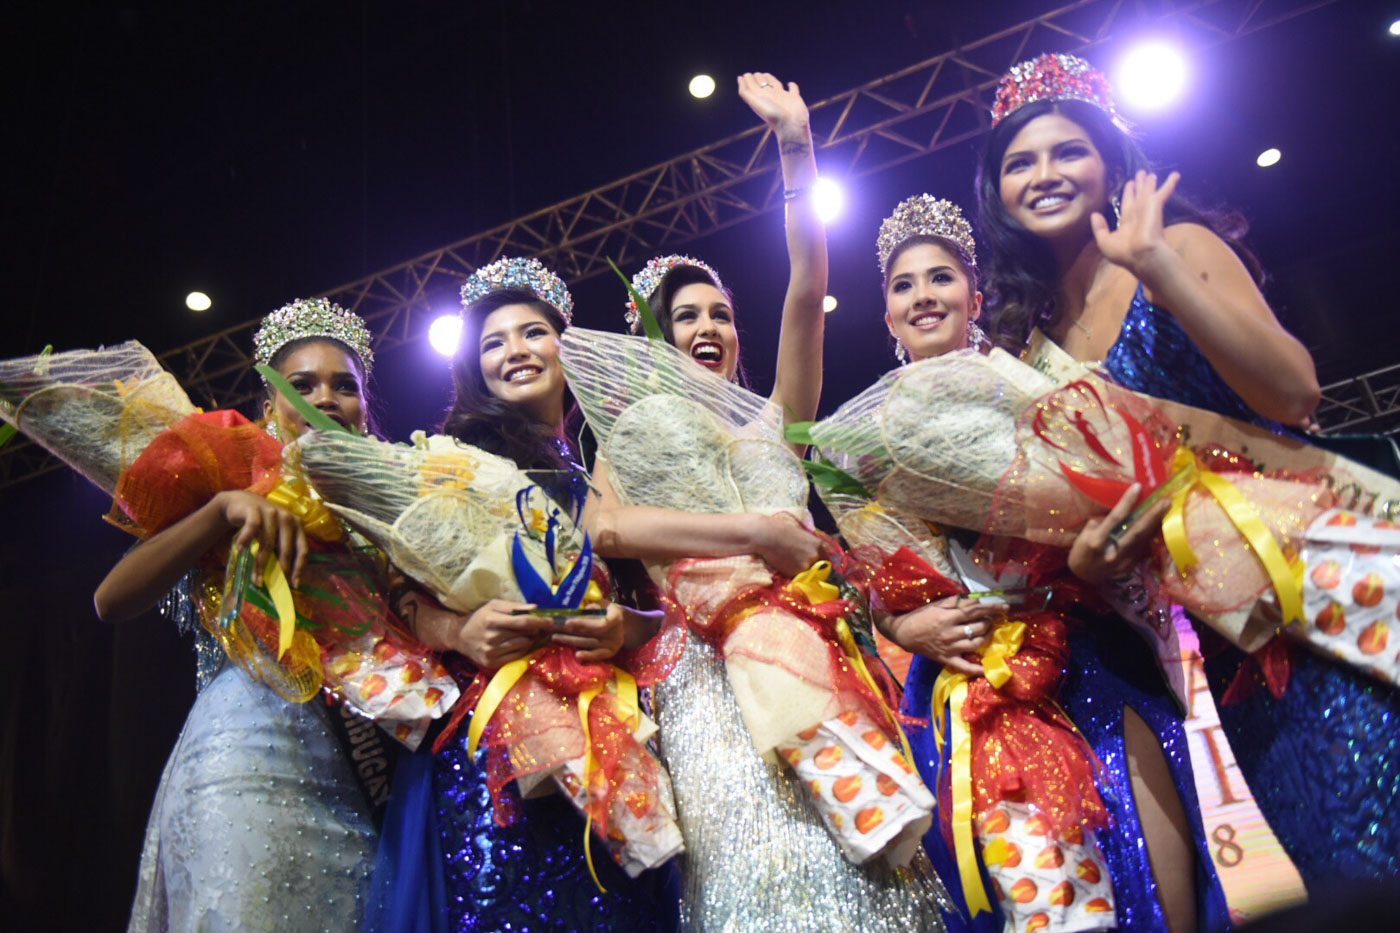 NEW SPOKESPERSONS. The 5 ladies led by Celeste Cortesi take on the responsibility of leading Miss Earth's causes. 